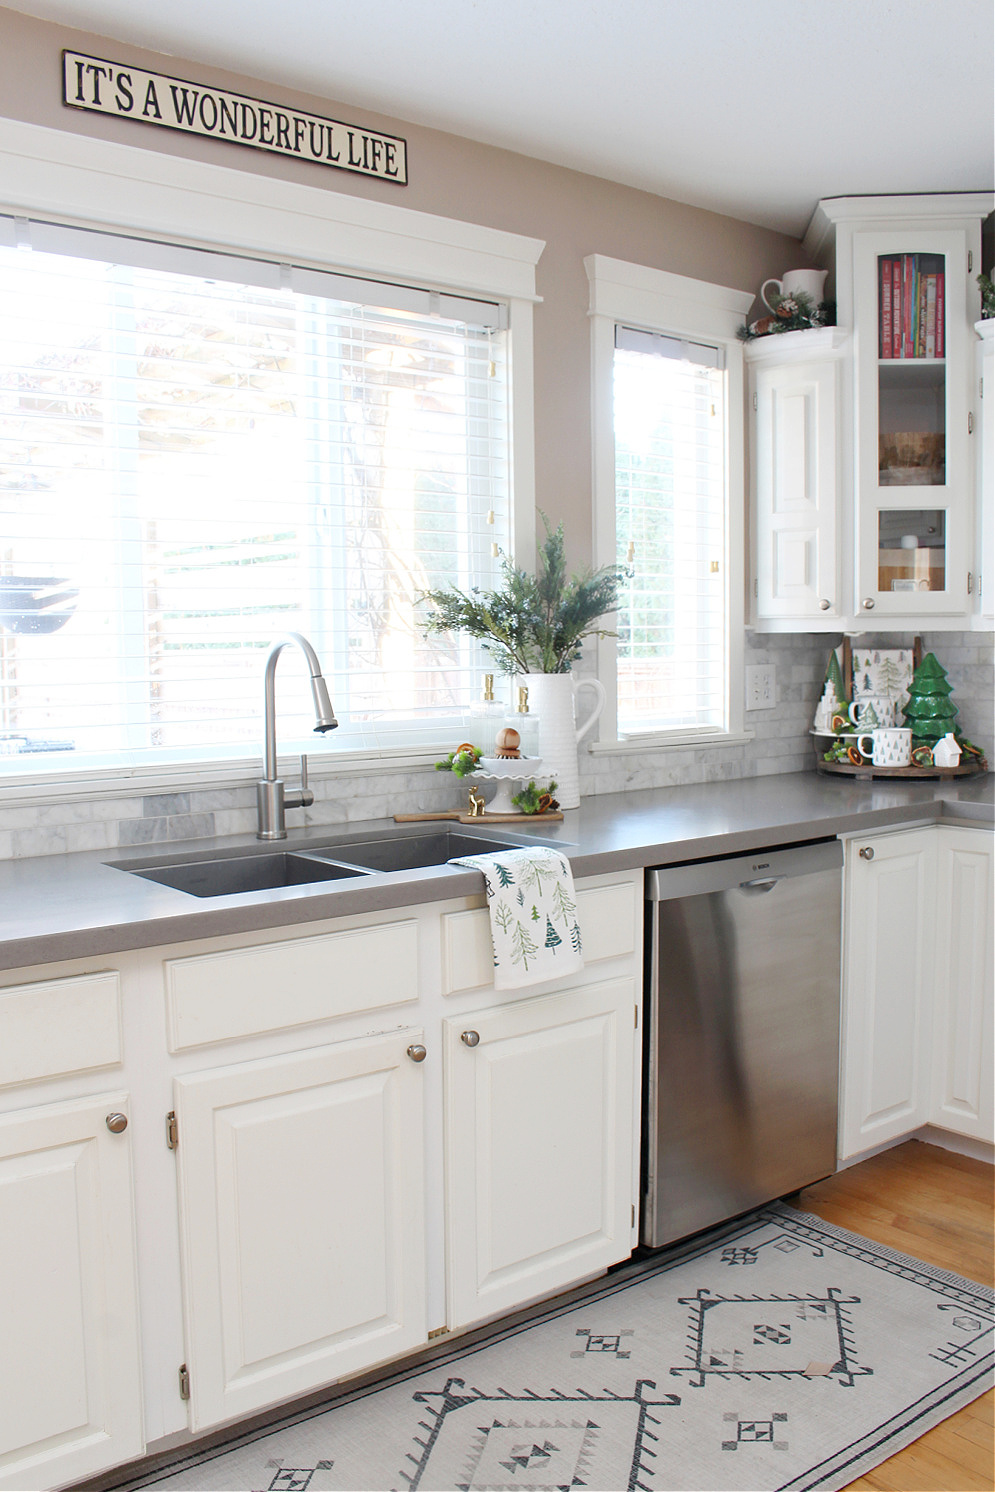 A white kitchen decorated for Christmas with green accent colors.